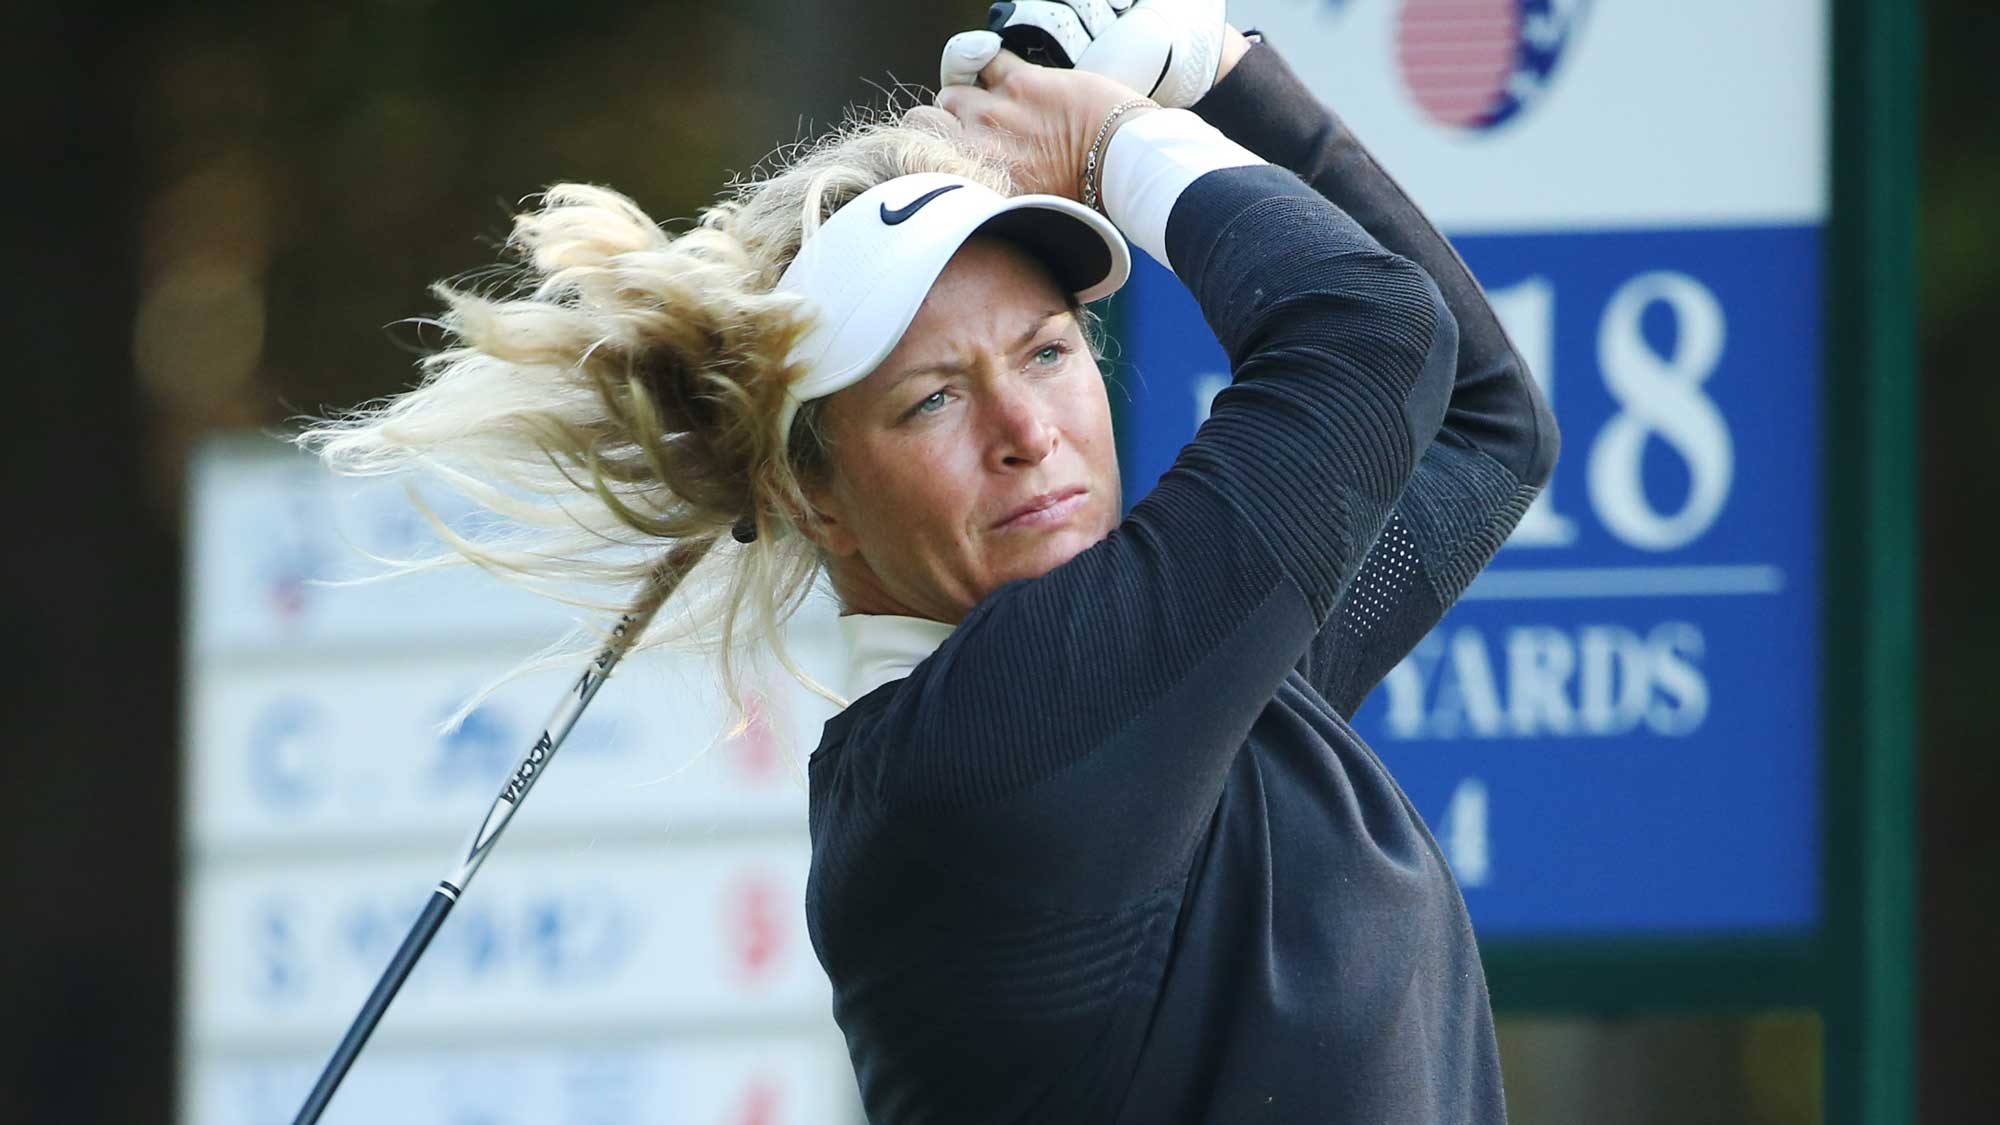 Suzann Pettersen of Norway hits her tee shot on the 2nd hole during the second round of the TOTO Japan Classic